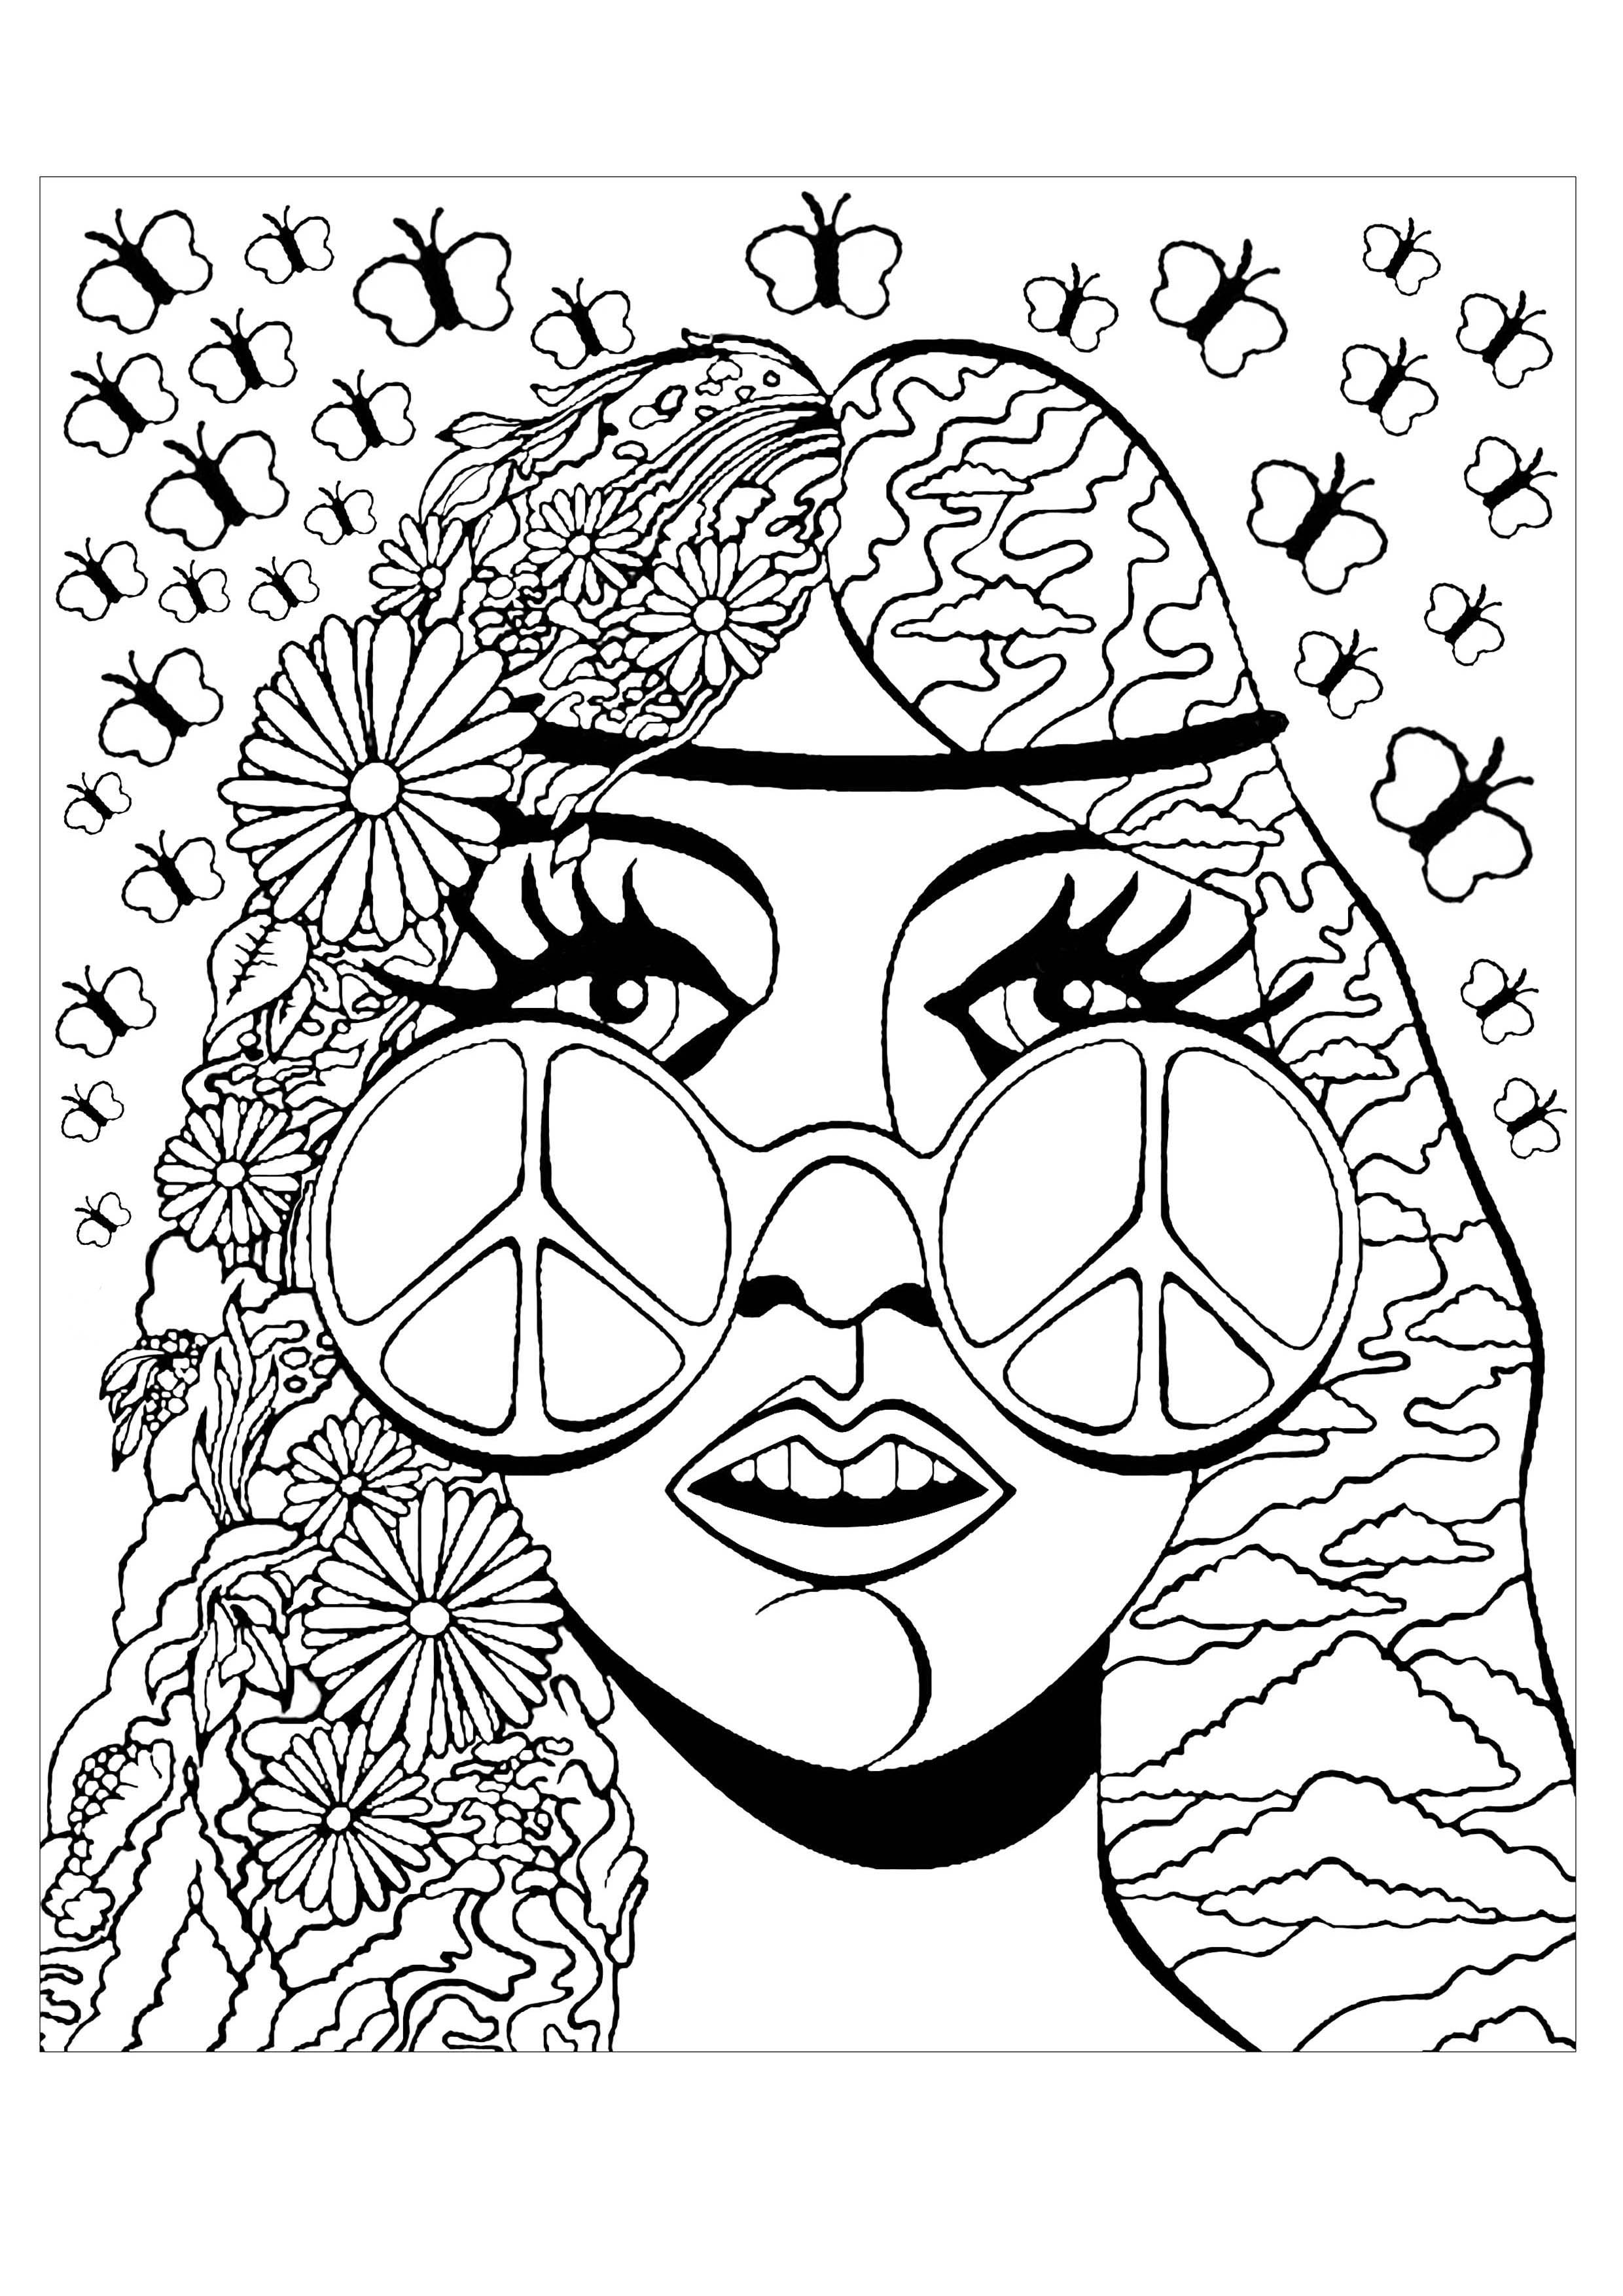 love and peace coloring pages